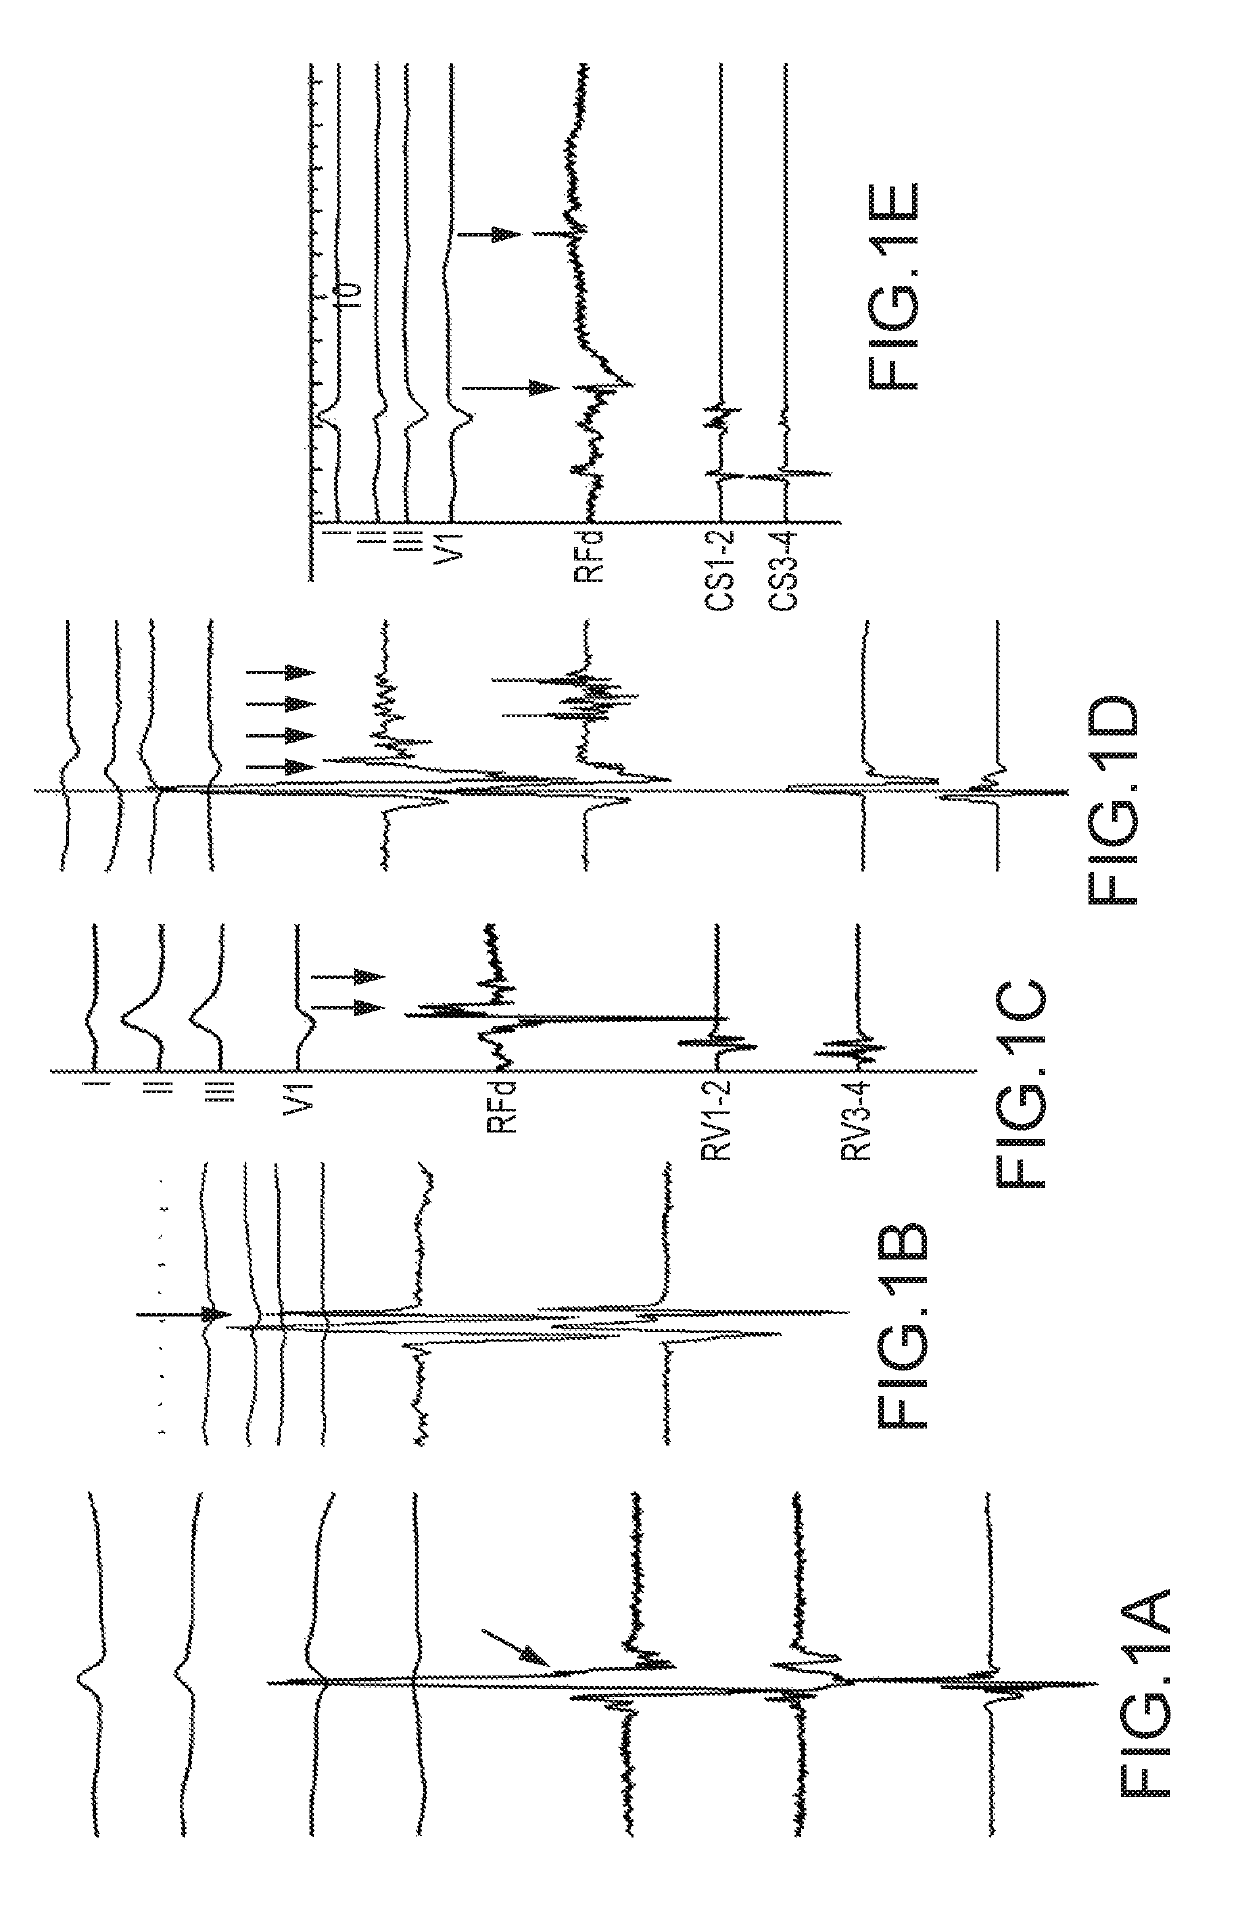 Methods and systems for statistically analyzing electrograms for local abnormal ventricular activities and mapping the same